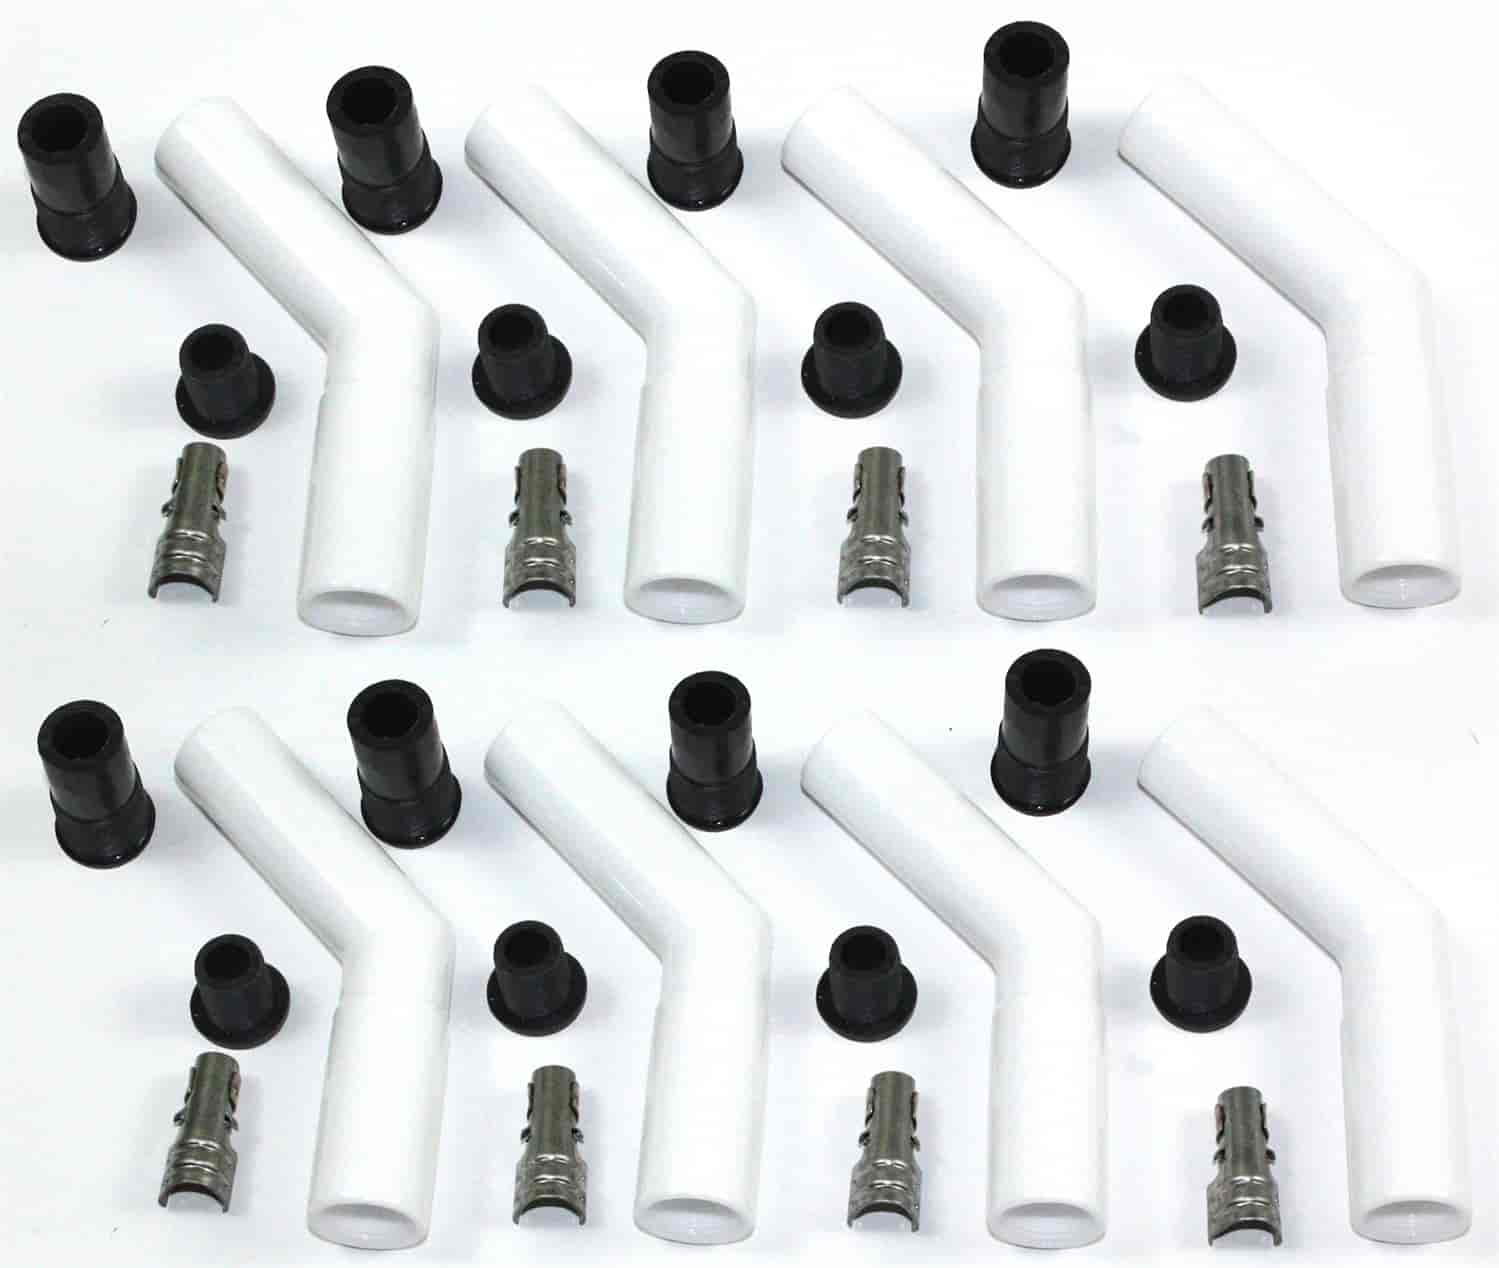 White Ceramic Spark Plug Boots - 45 Degree - Fits 8 mm Wire - Set of 8